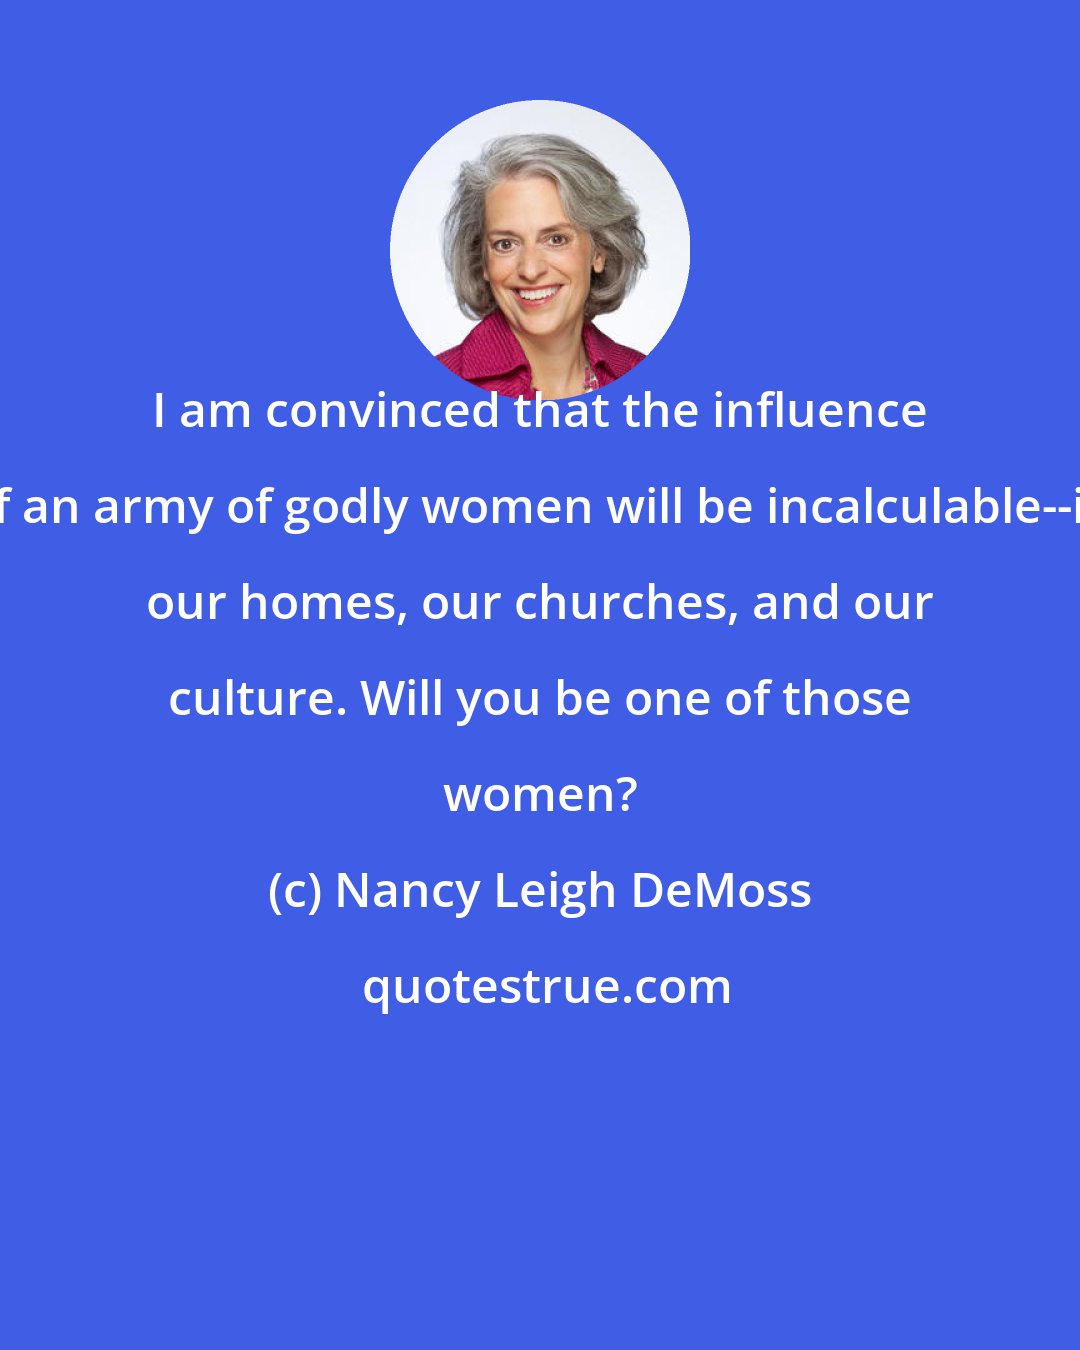 Nancy Leigh DeMoss: I am convinced that the influence of an army of godly women will be incalculable--in our homes, our churches, and our culture. Will you be one of those women?